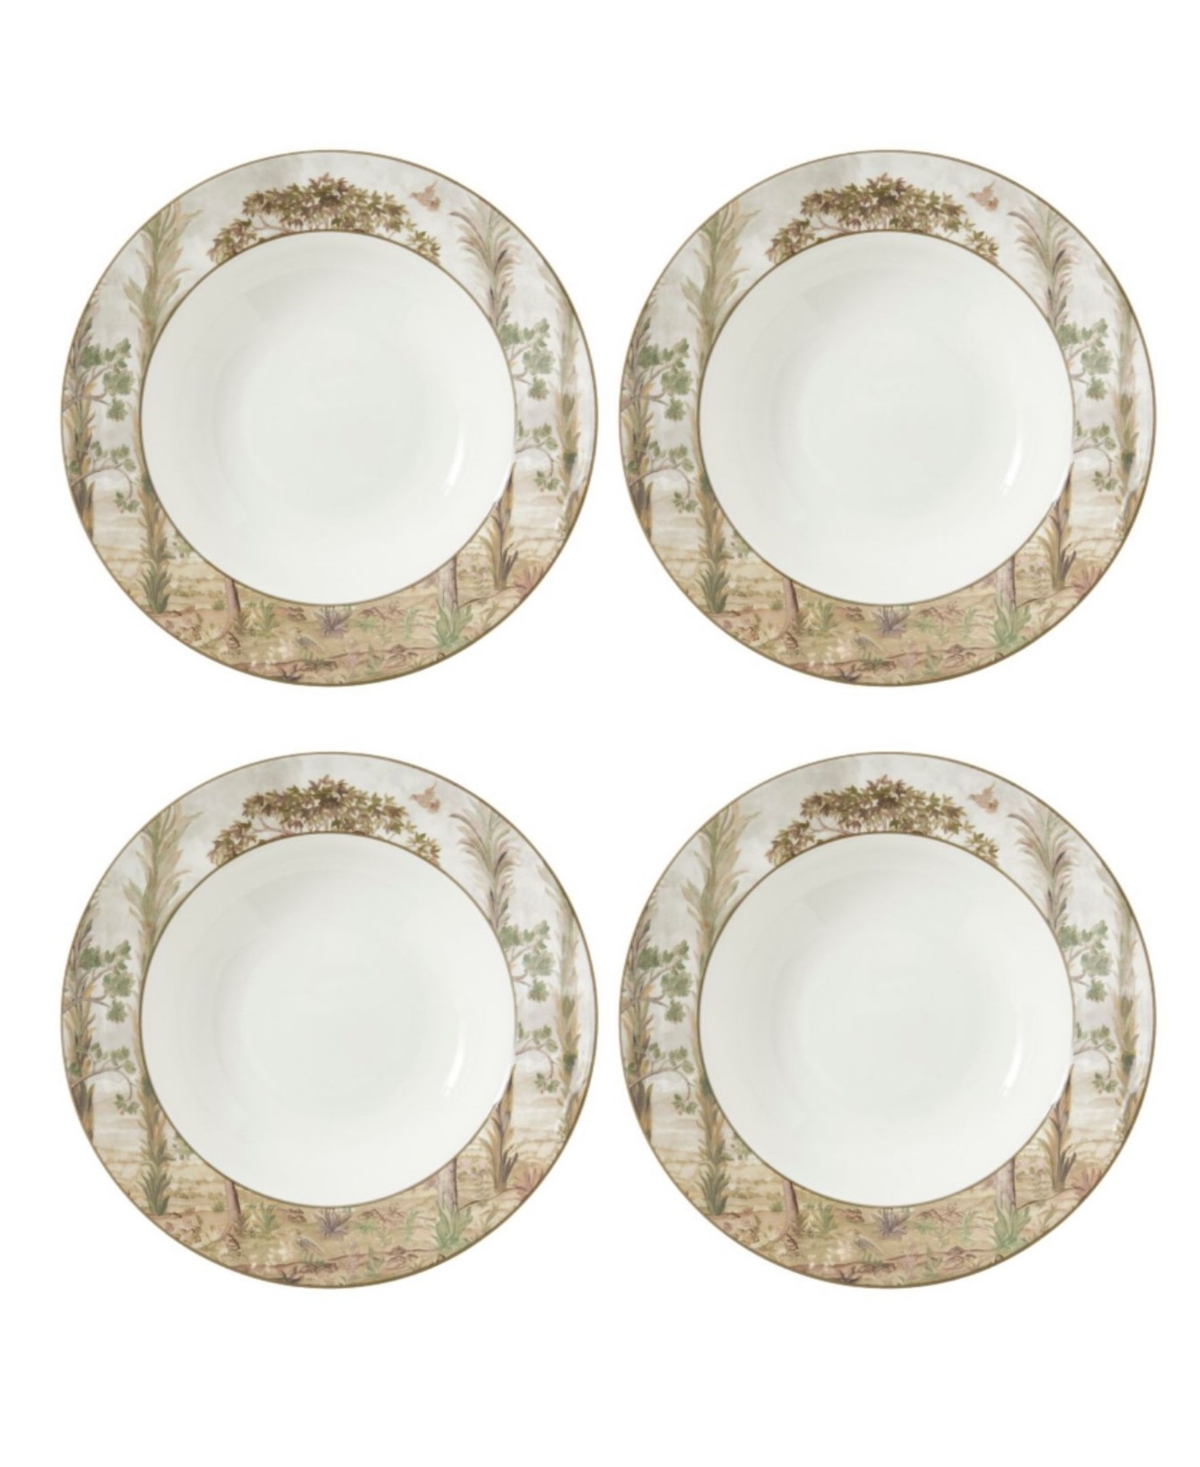 Tall Trees 4 Piece Pasta Bowls Set, Service for 4 - Assorted